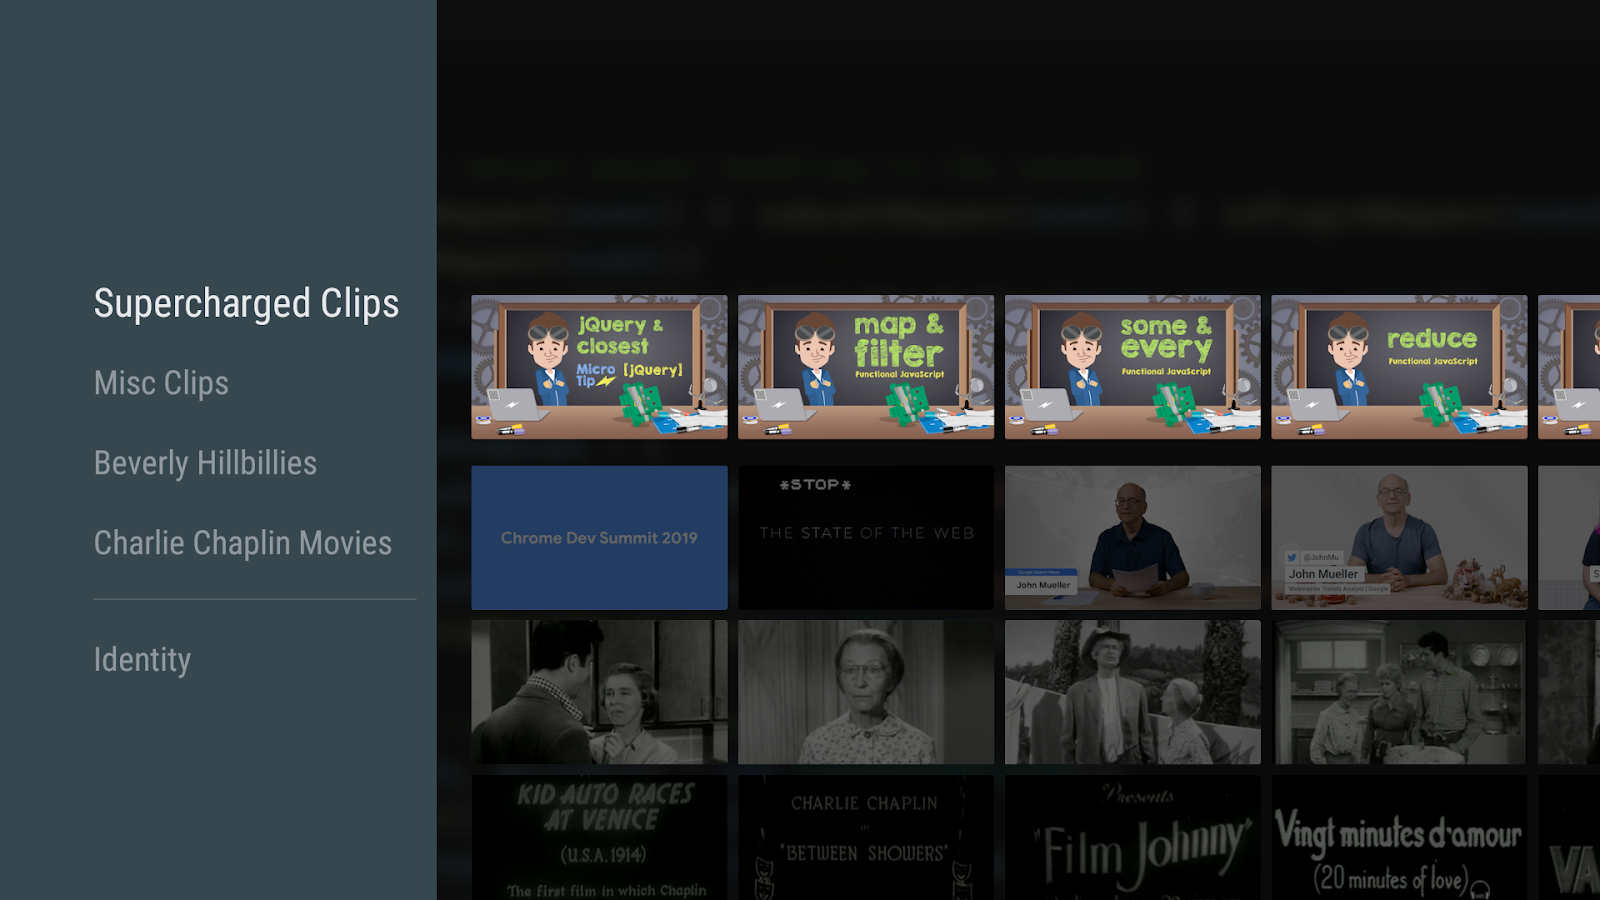 Improve Engagement on Watch Next for Movie/TV Episodes on Android TV